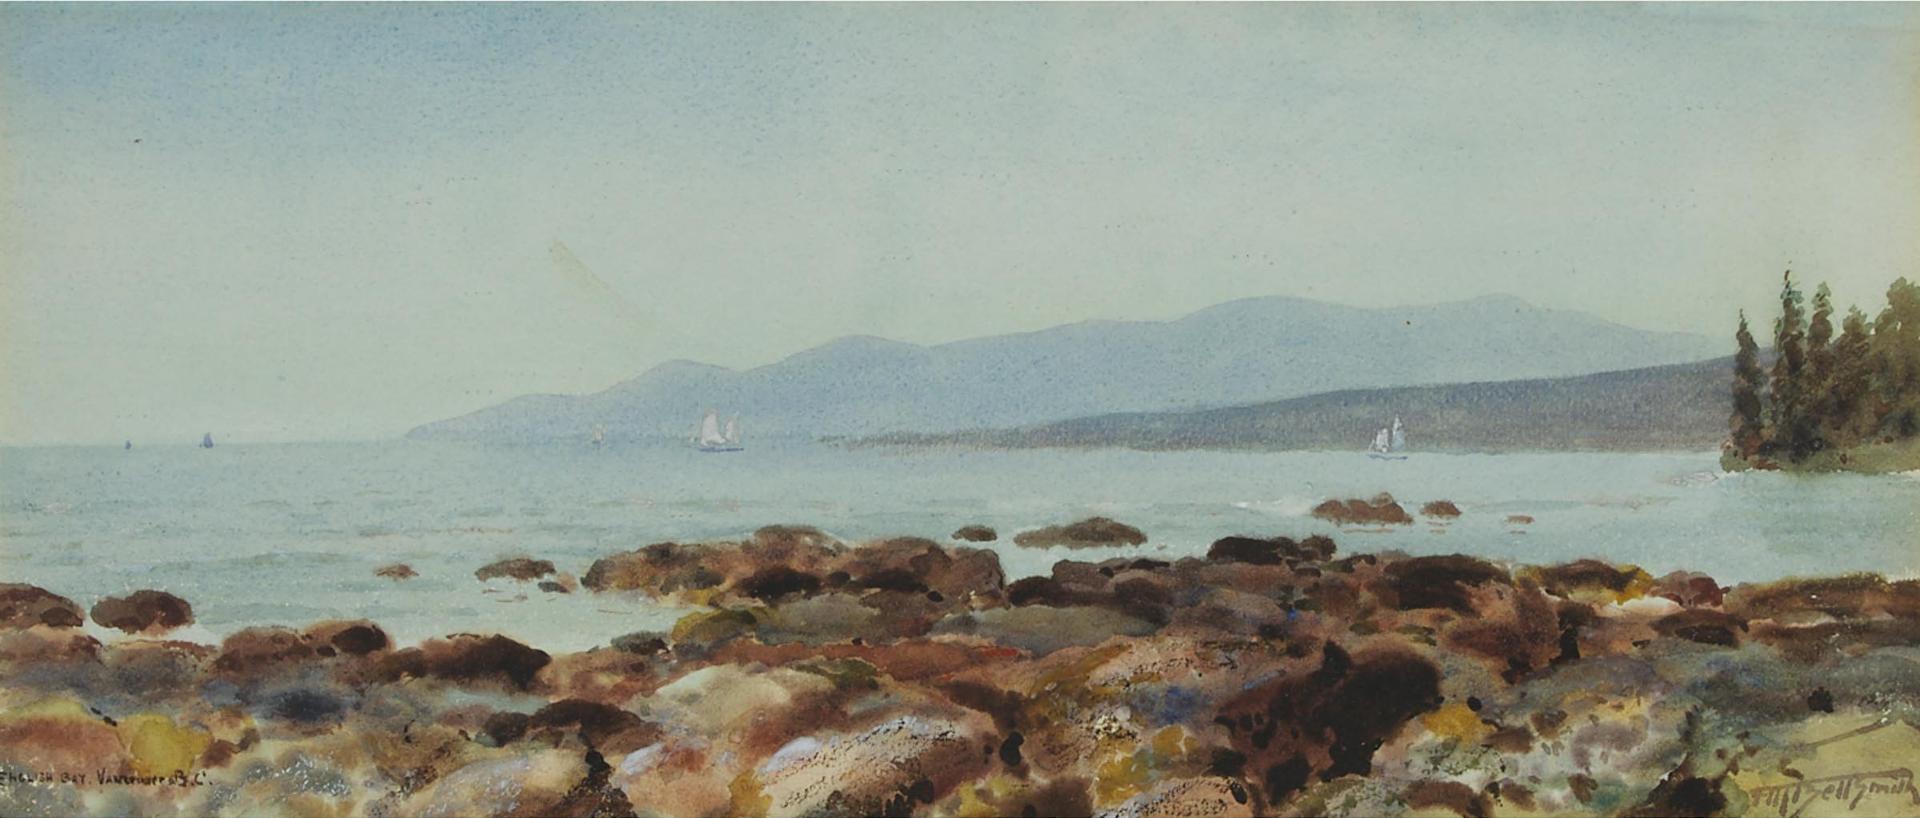 Frederic Martlett Bell-Smith (1846-1923) - English Bay, Vancouver B.C. C.1900